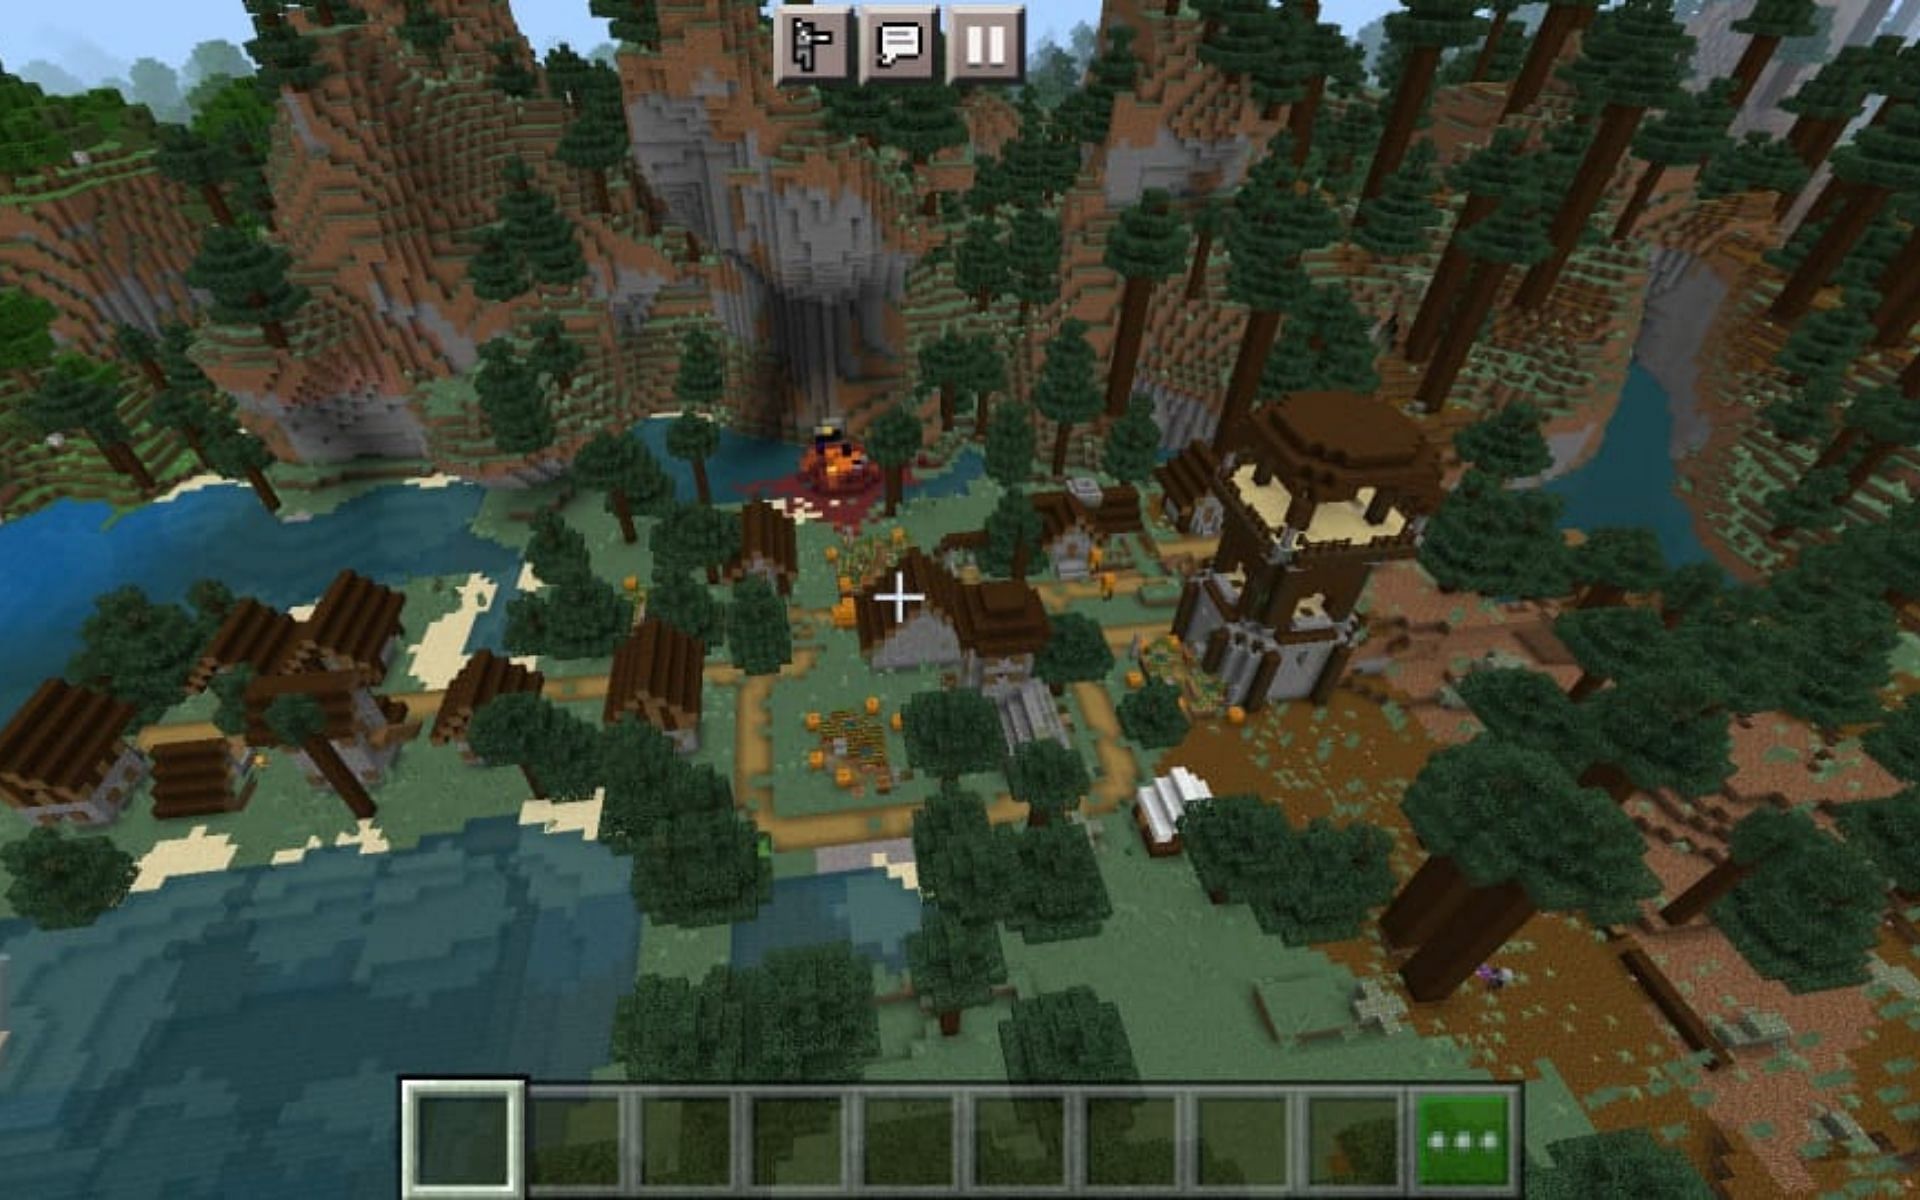 Village with an Outpost at its entrance (Image via Minecraft)